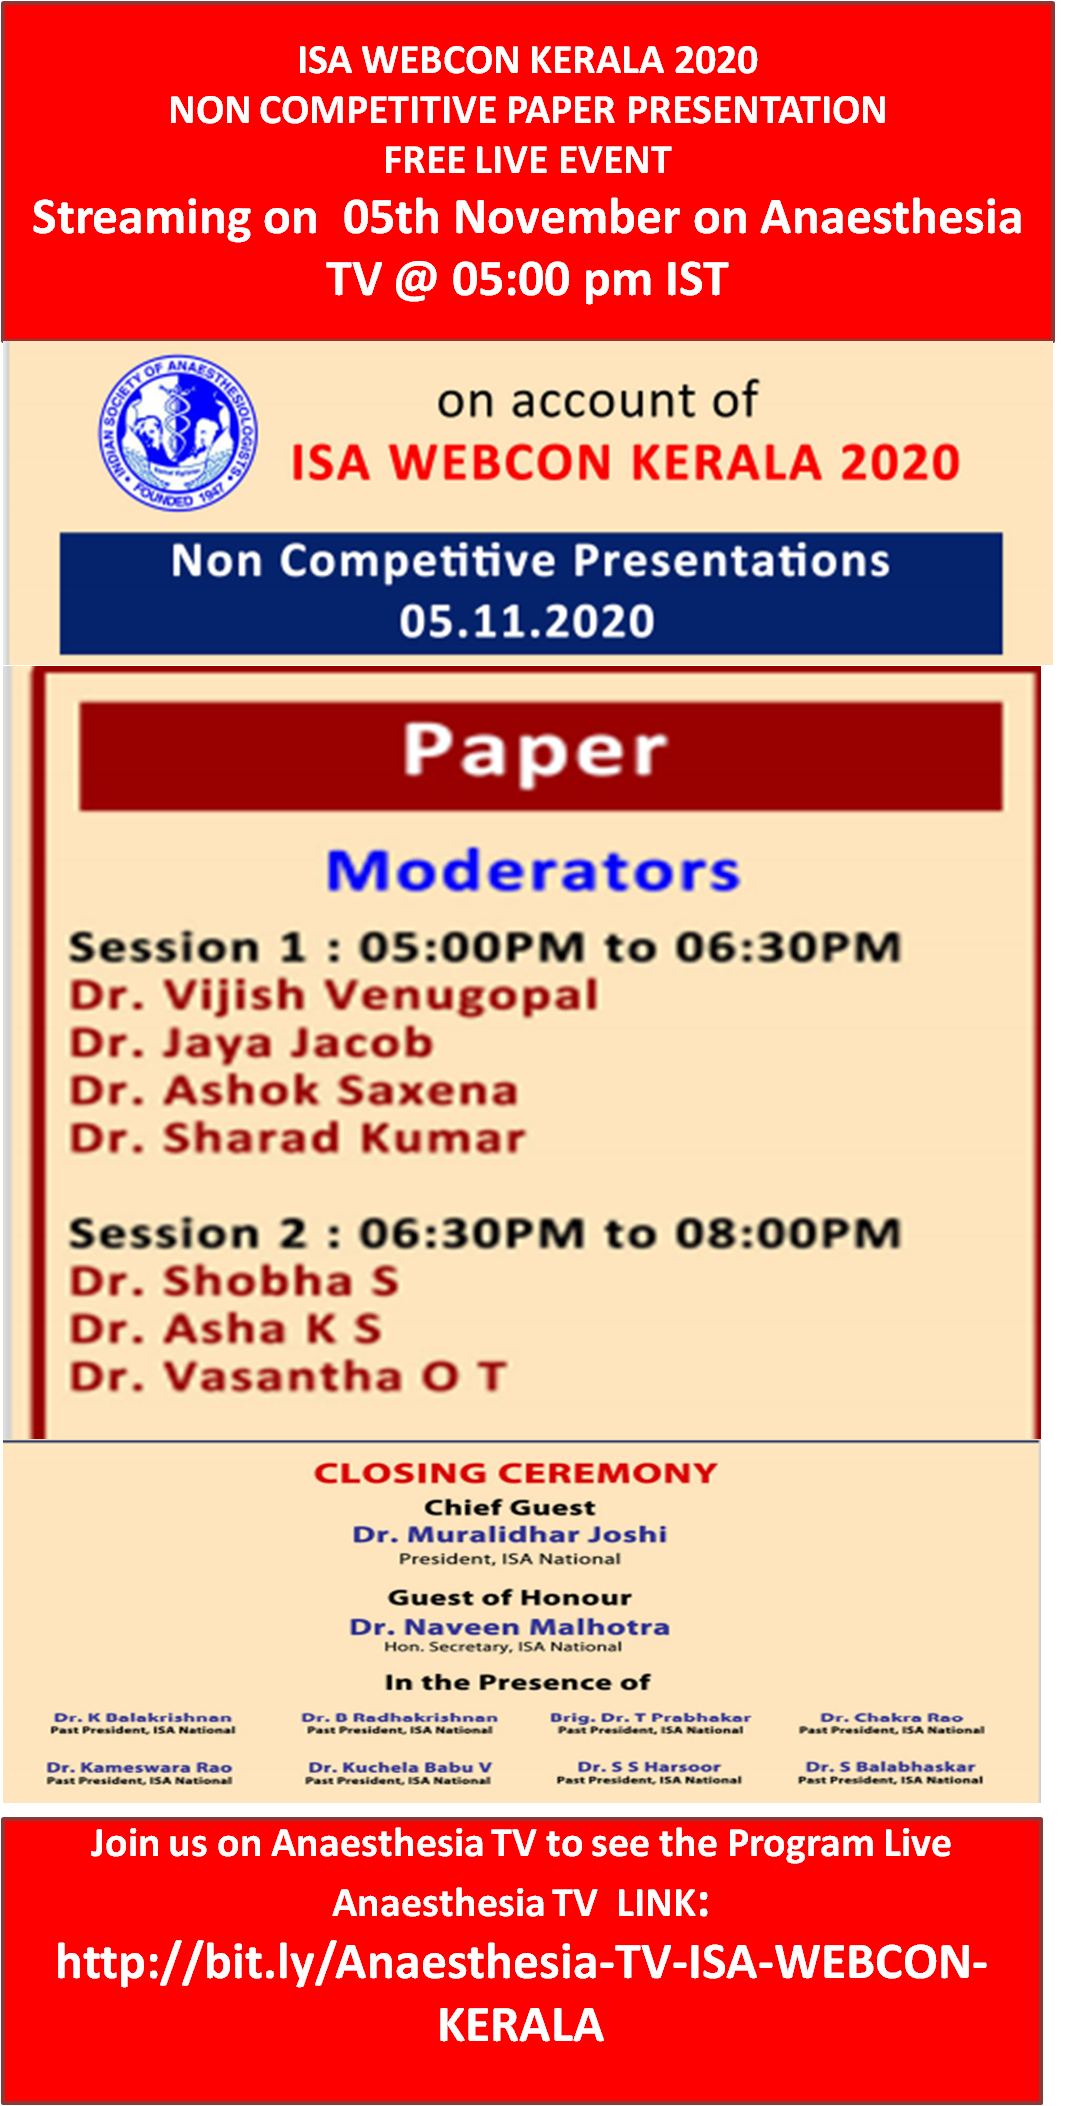 ISA WEBCON KERALA 2020 NON COMPETITIVE PAPER PRESENTATION on  05th November @ 05:00 pm IST